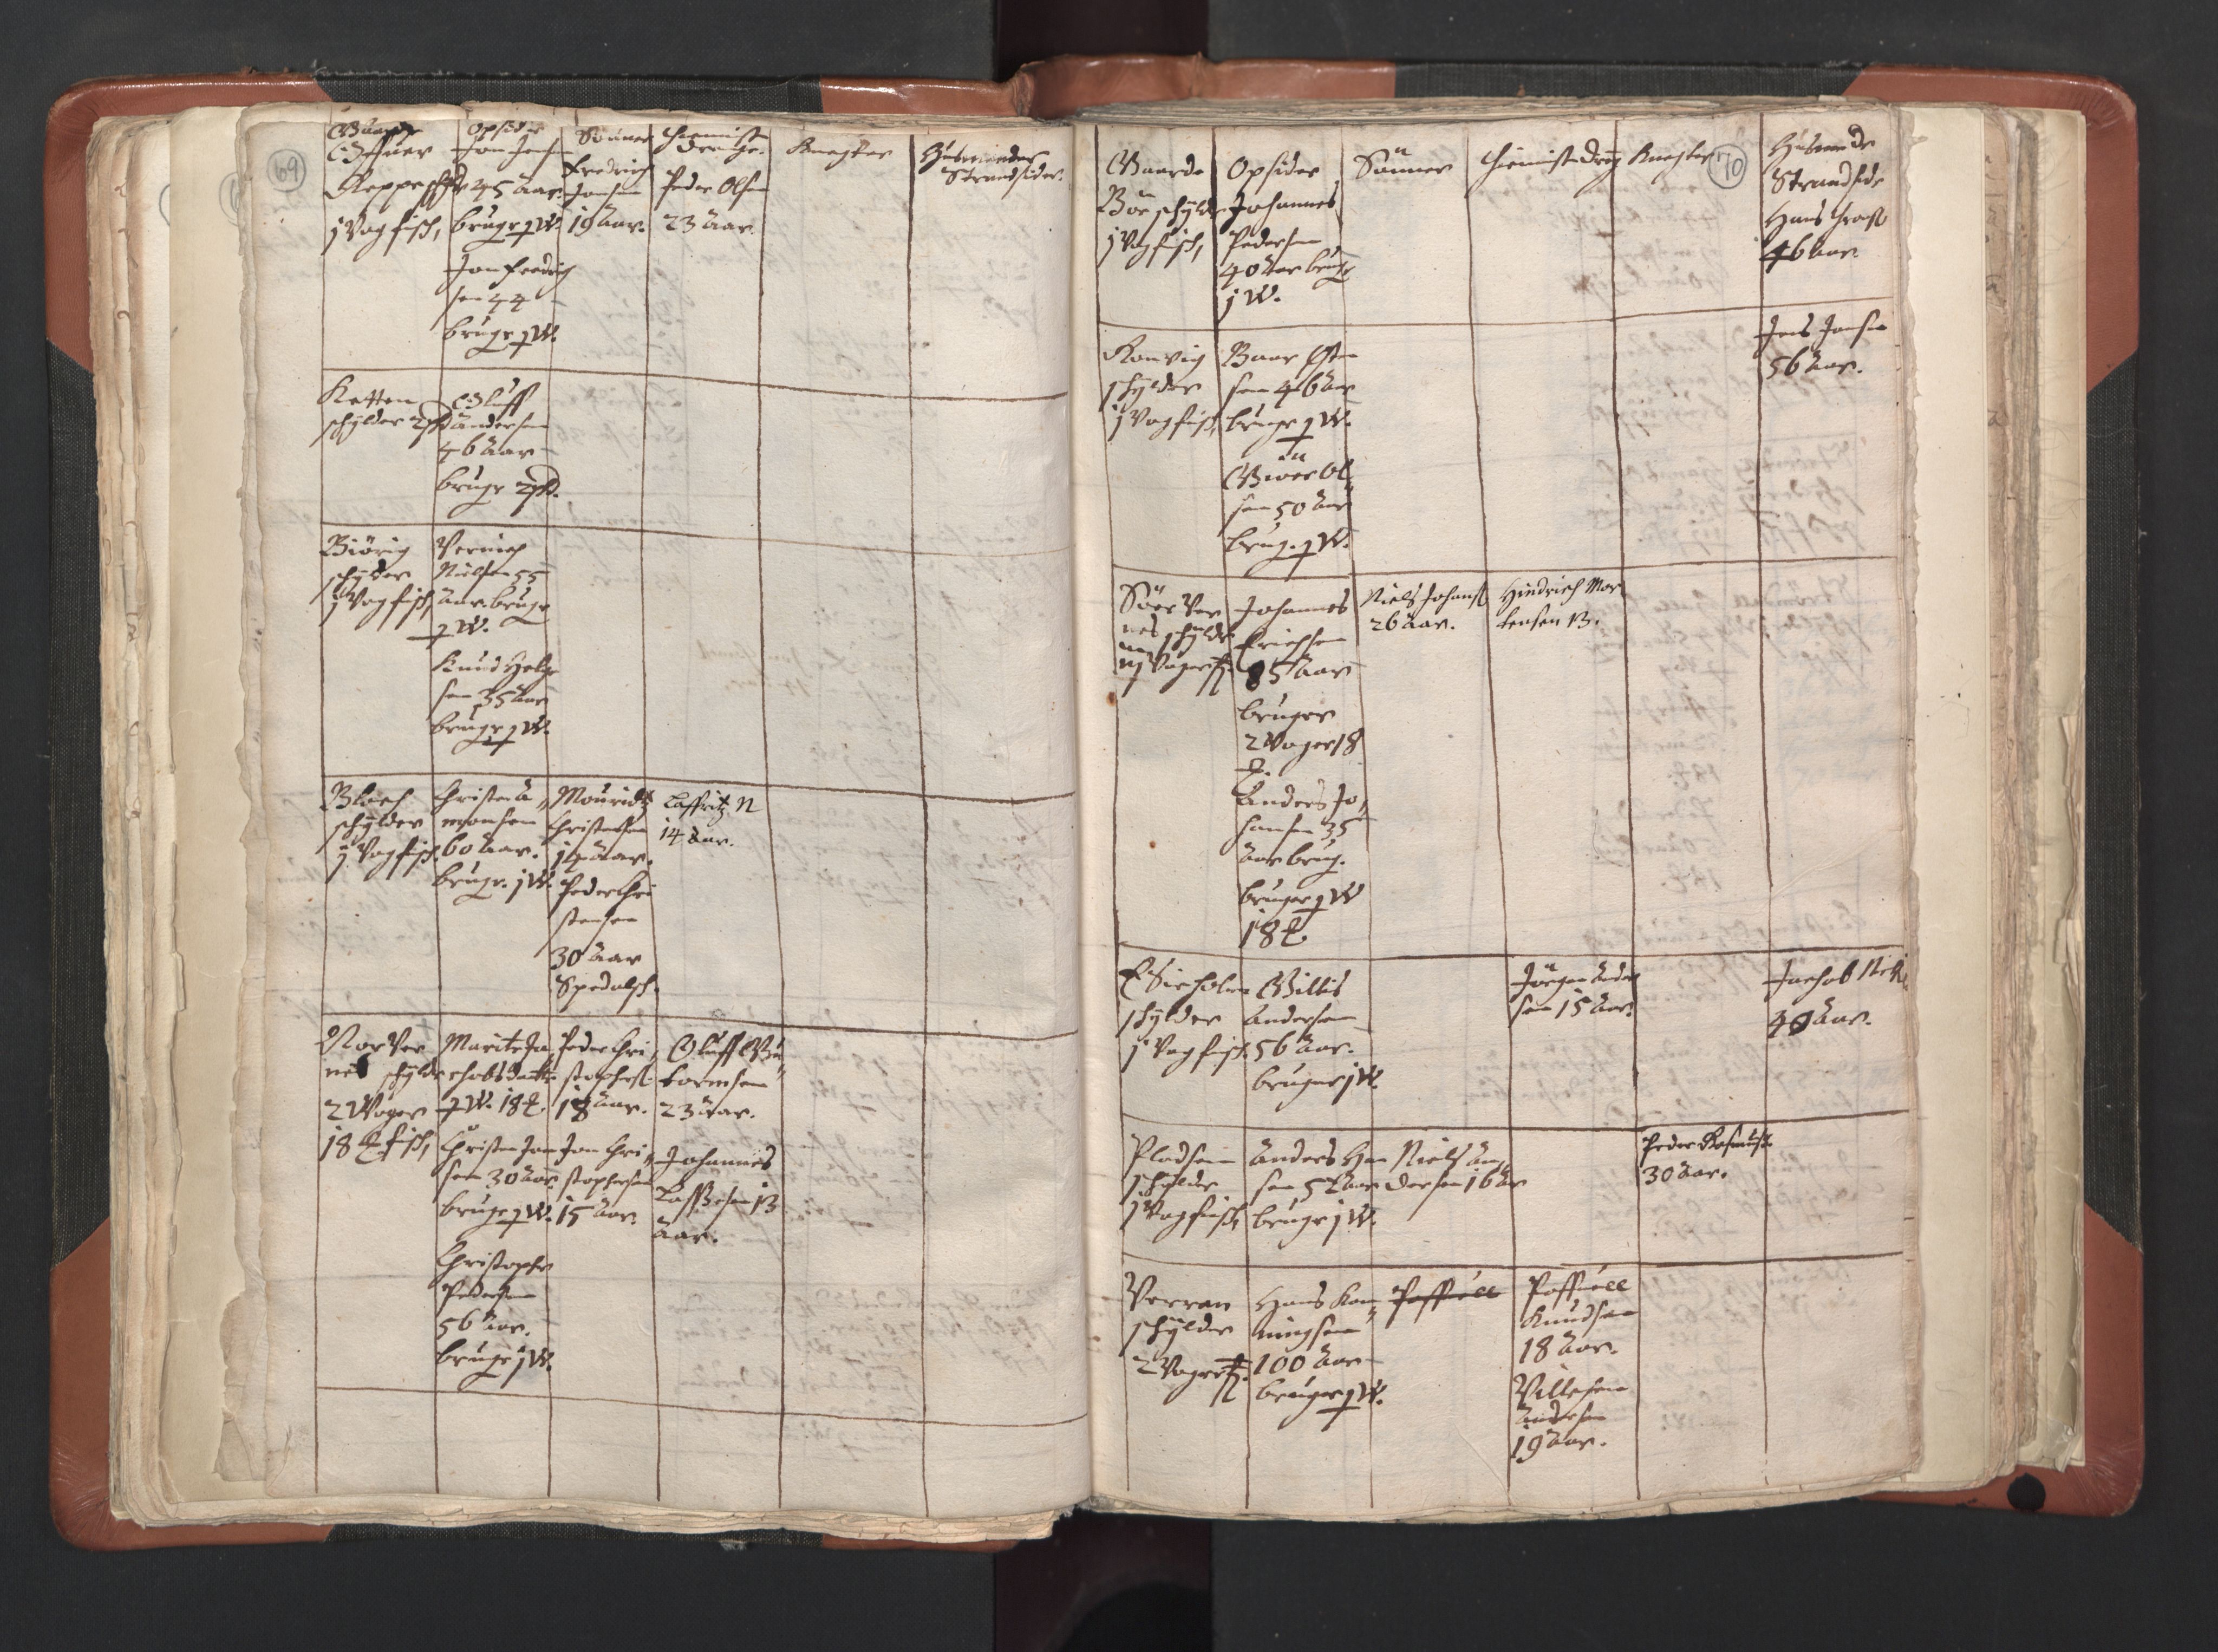 RA, Vicar's Census 1664-1666, no. 35: Helgeland deanery and Salten deanery, 1664-1666, p. 69-70